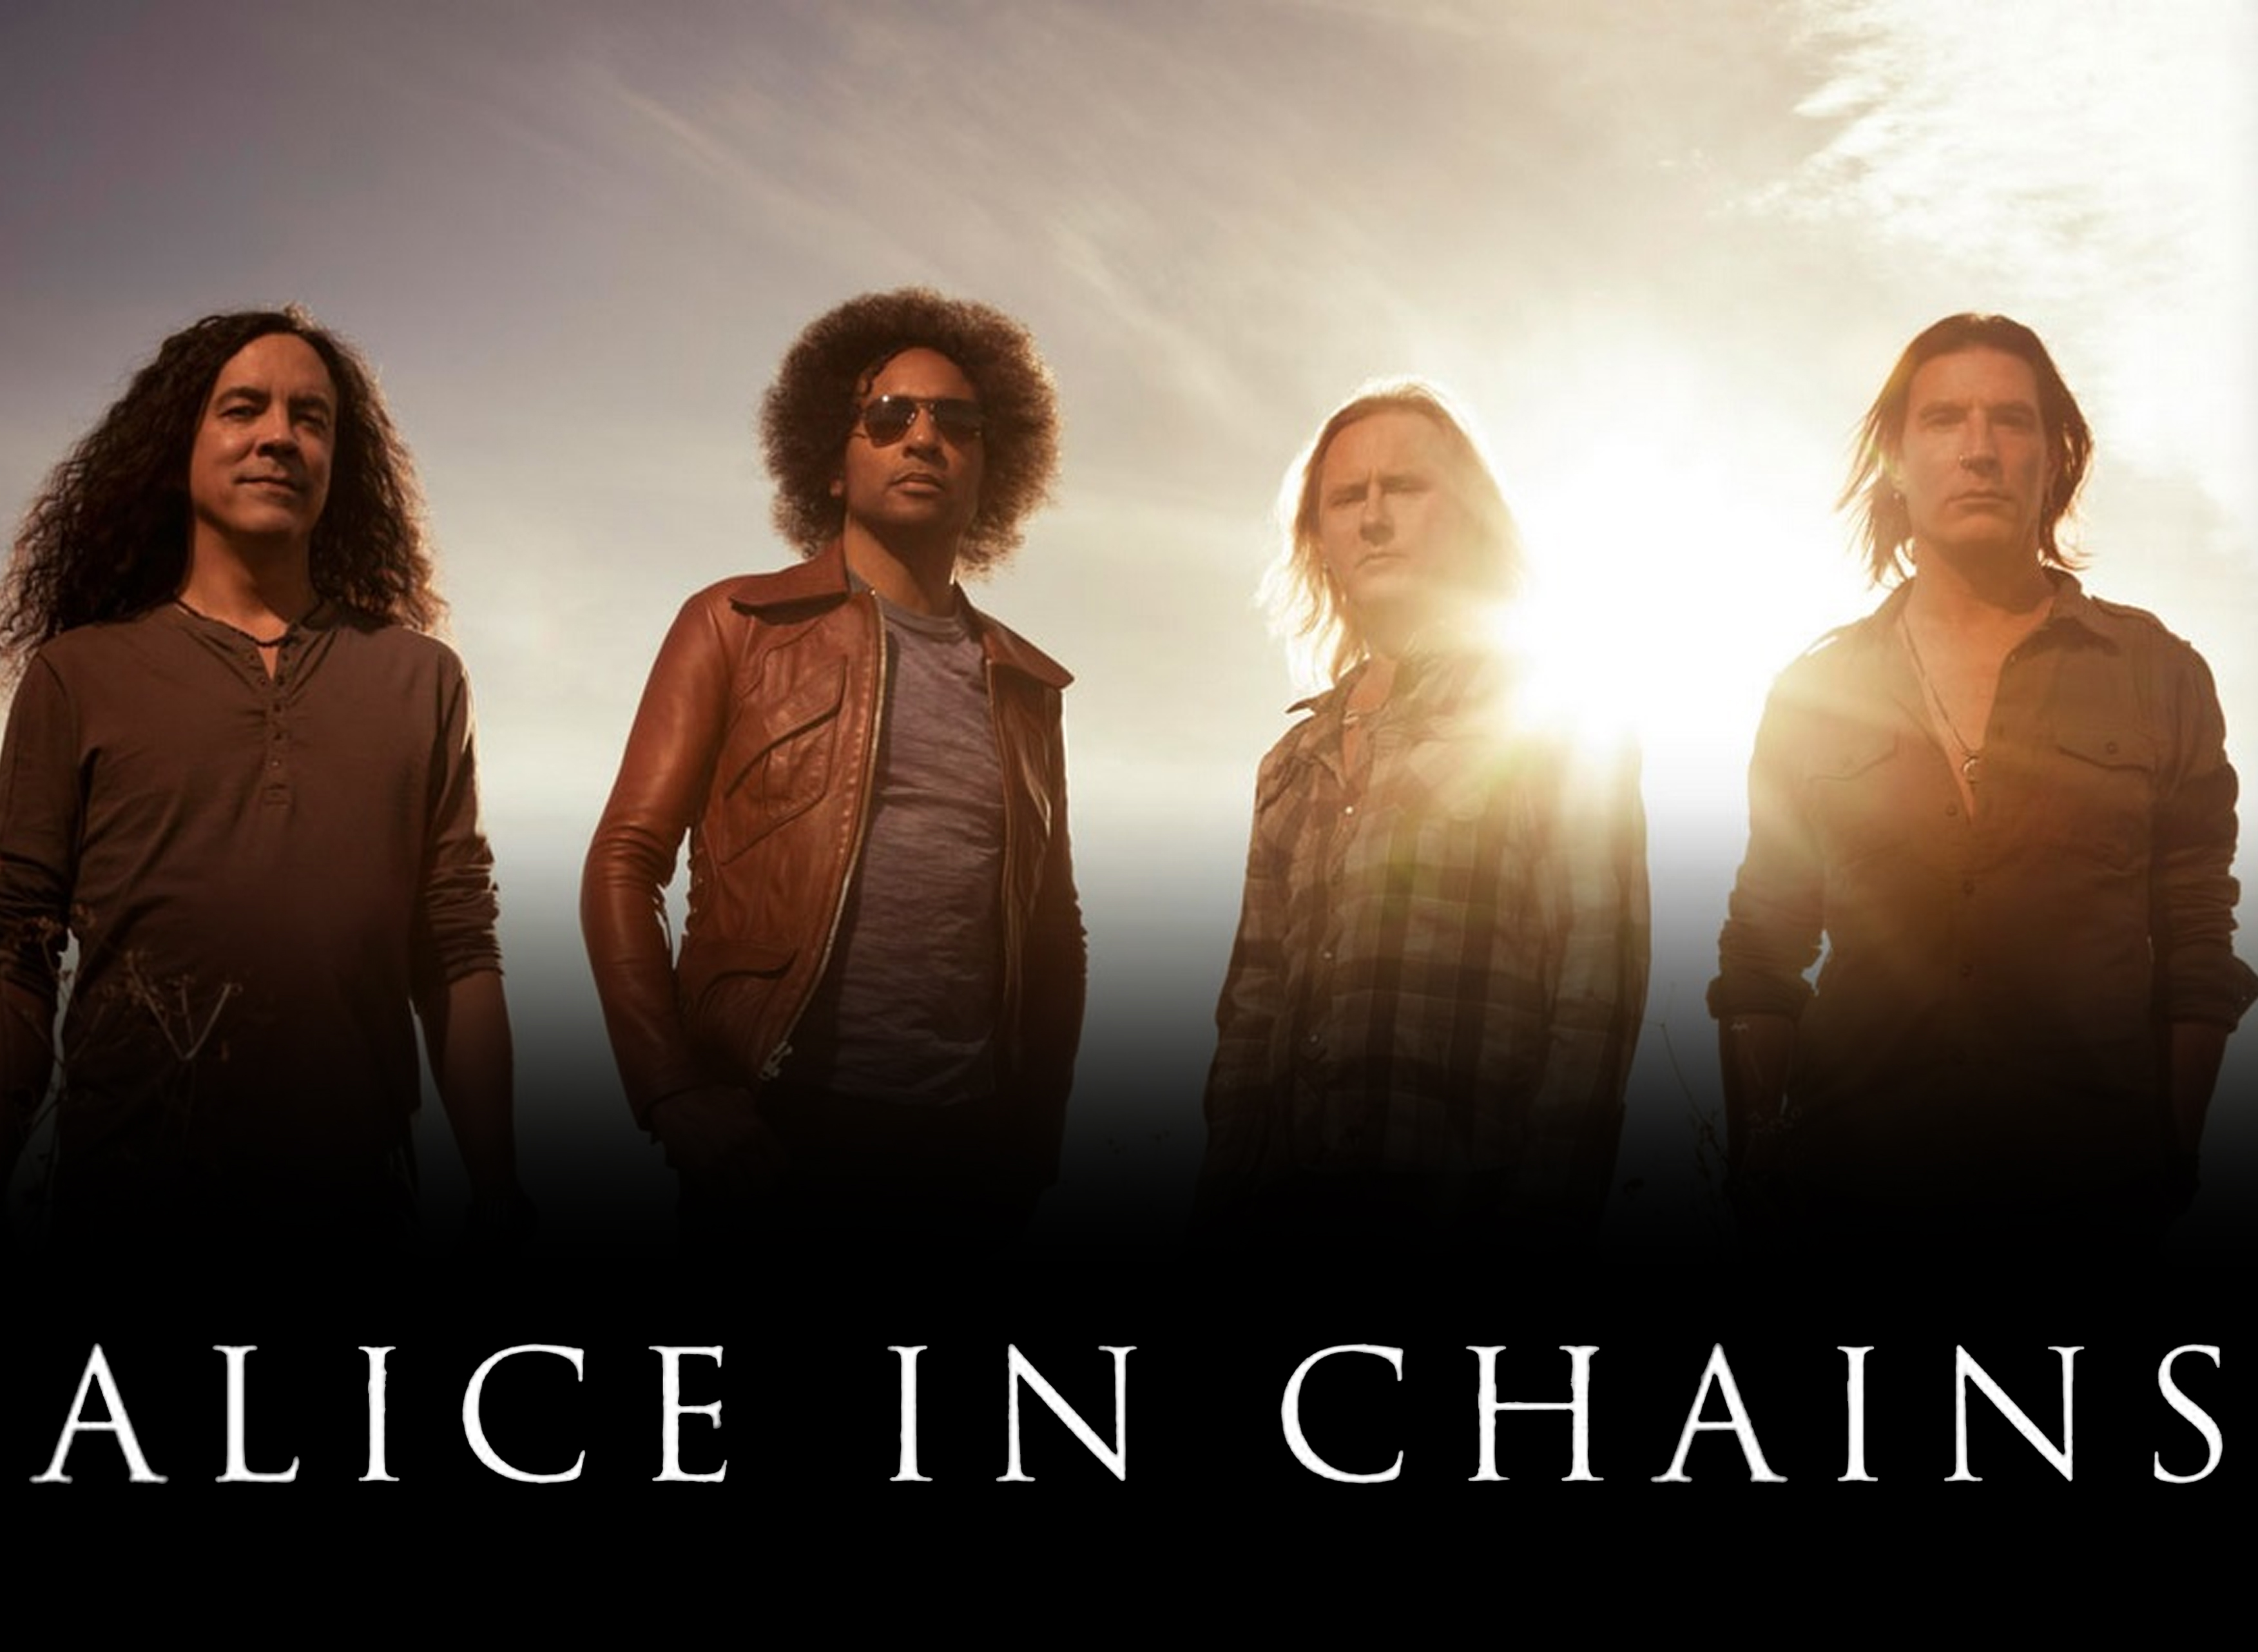 Rocksmith 2014 Edition, Alice in Chains Song Pack lançado, Veja as